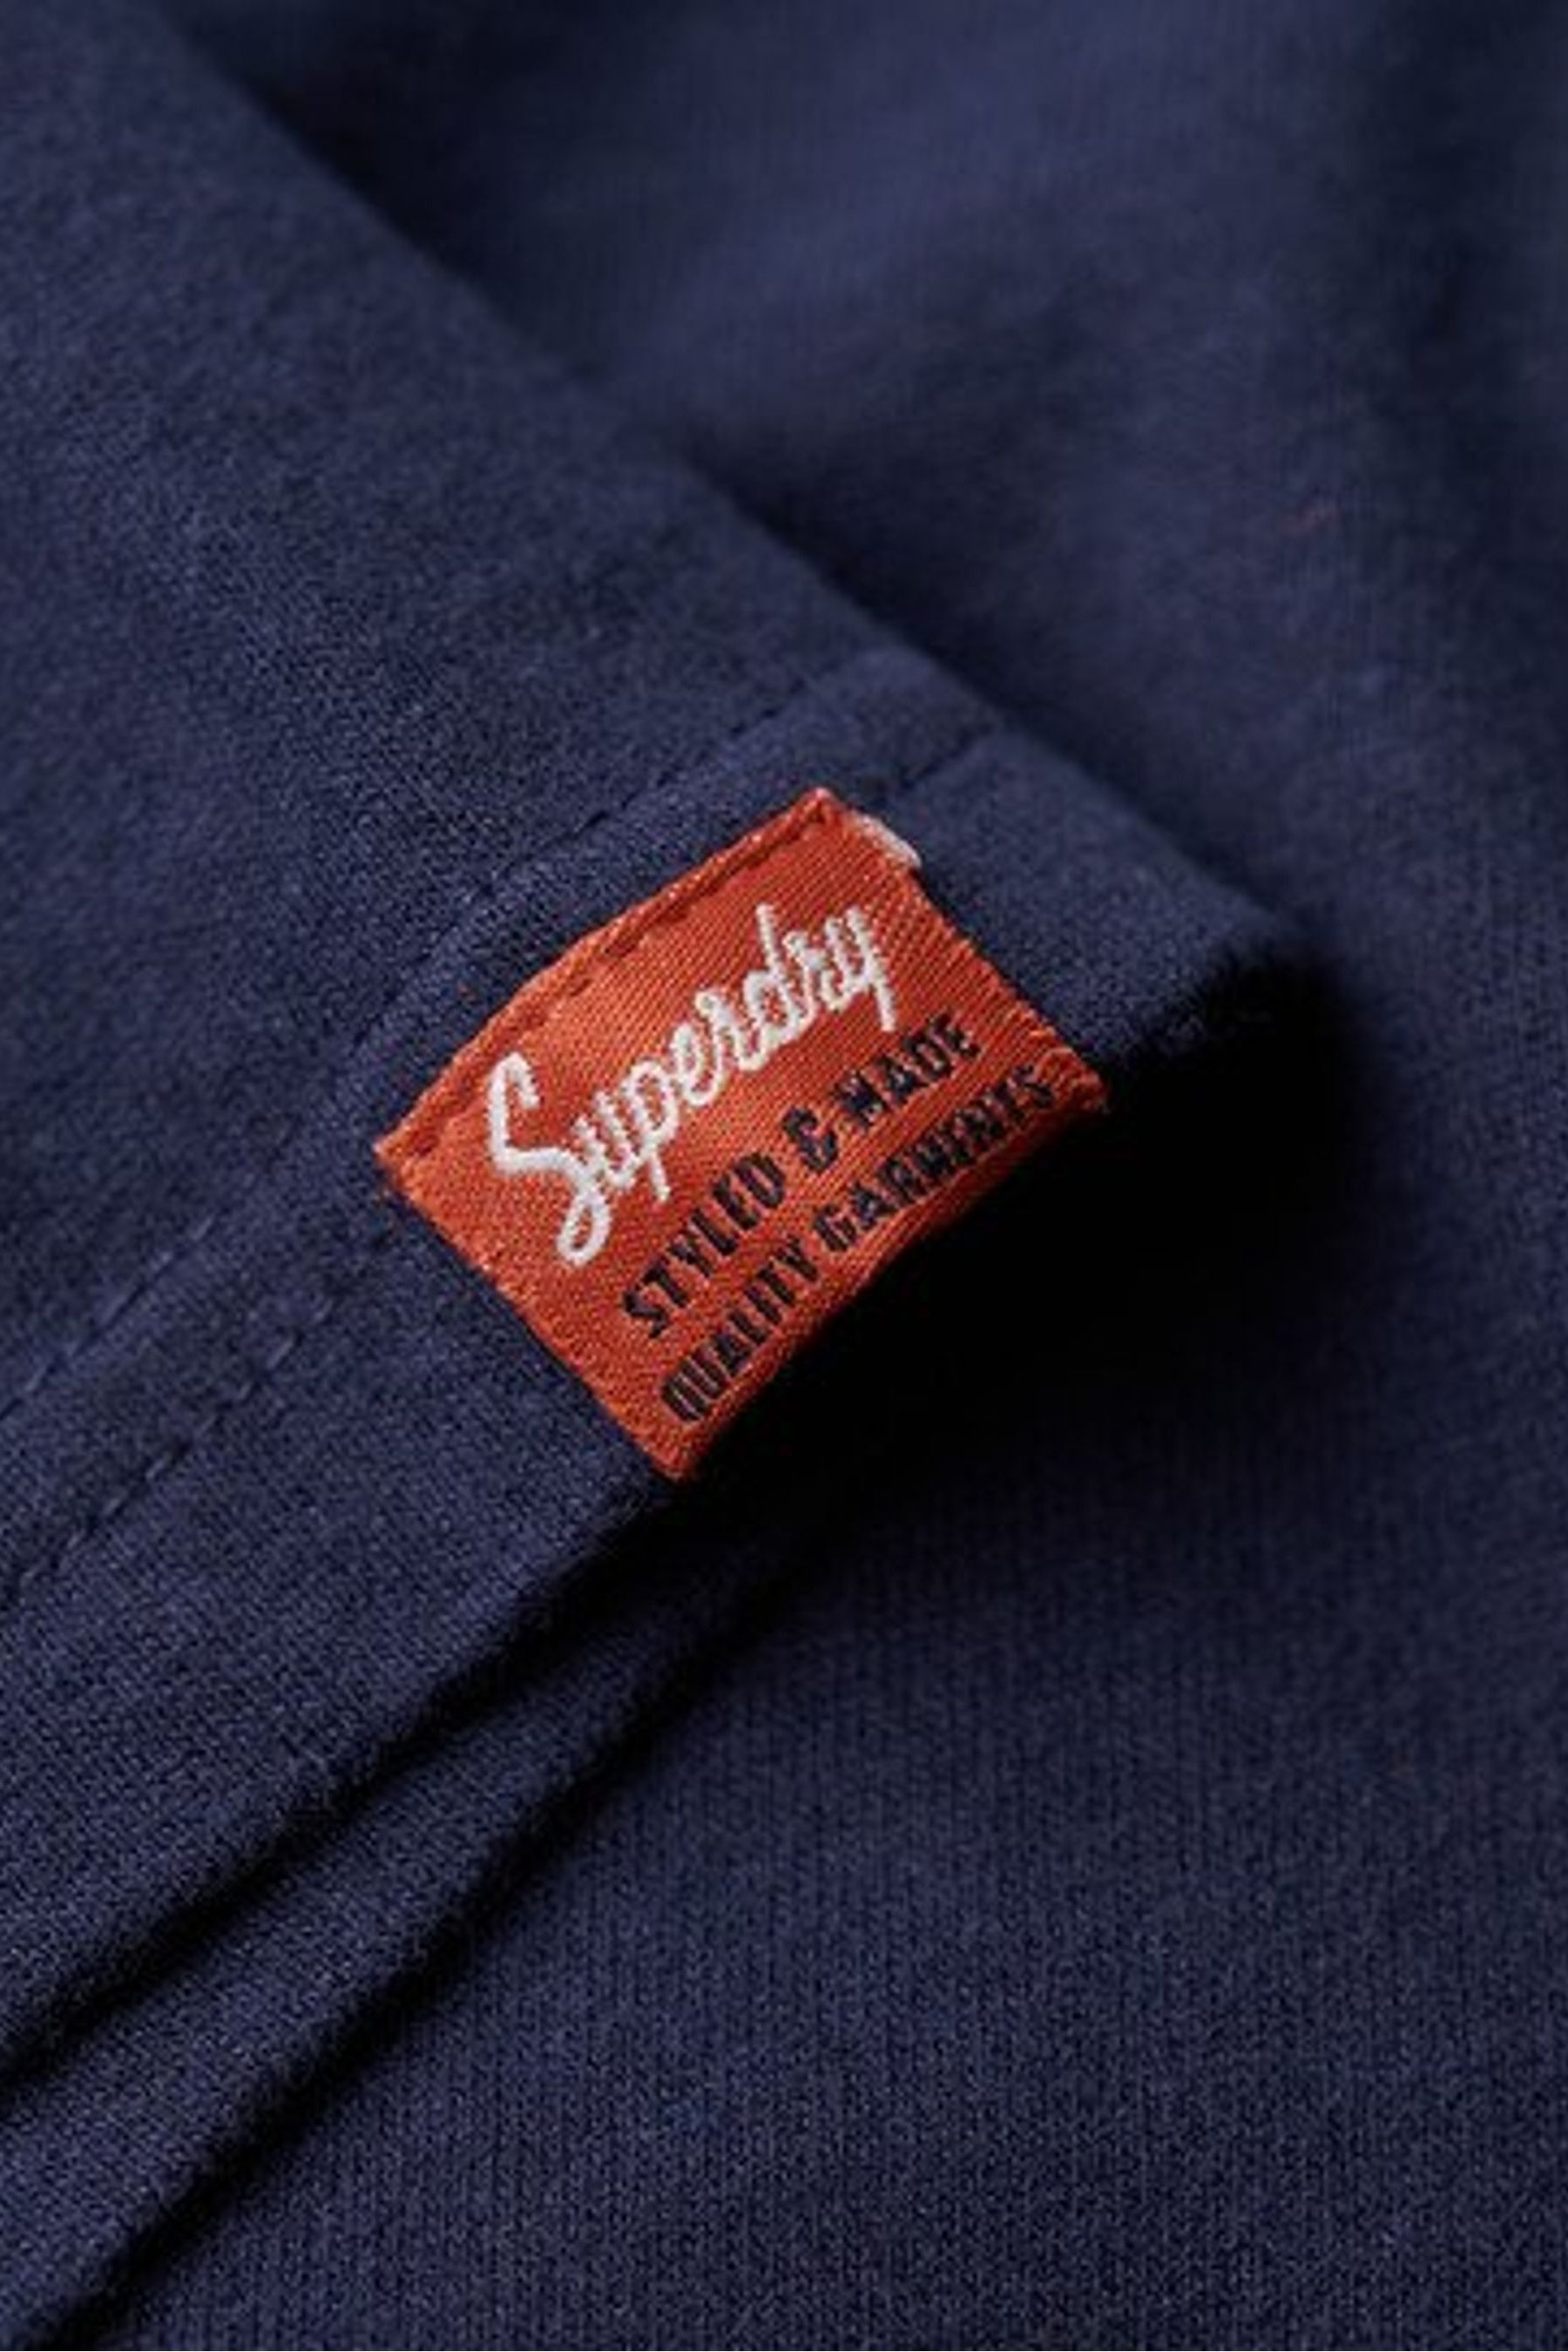 Superdry Blue Copper Label Chest Graphic T-Shirt - Image 4 of 4